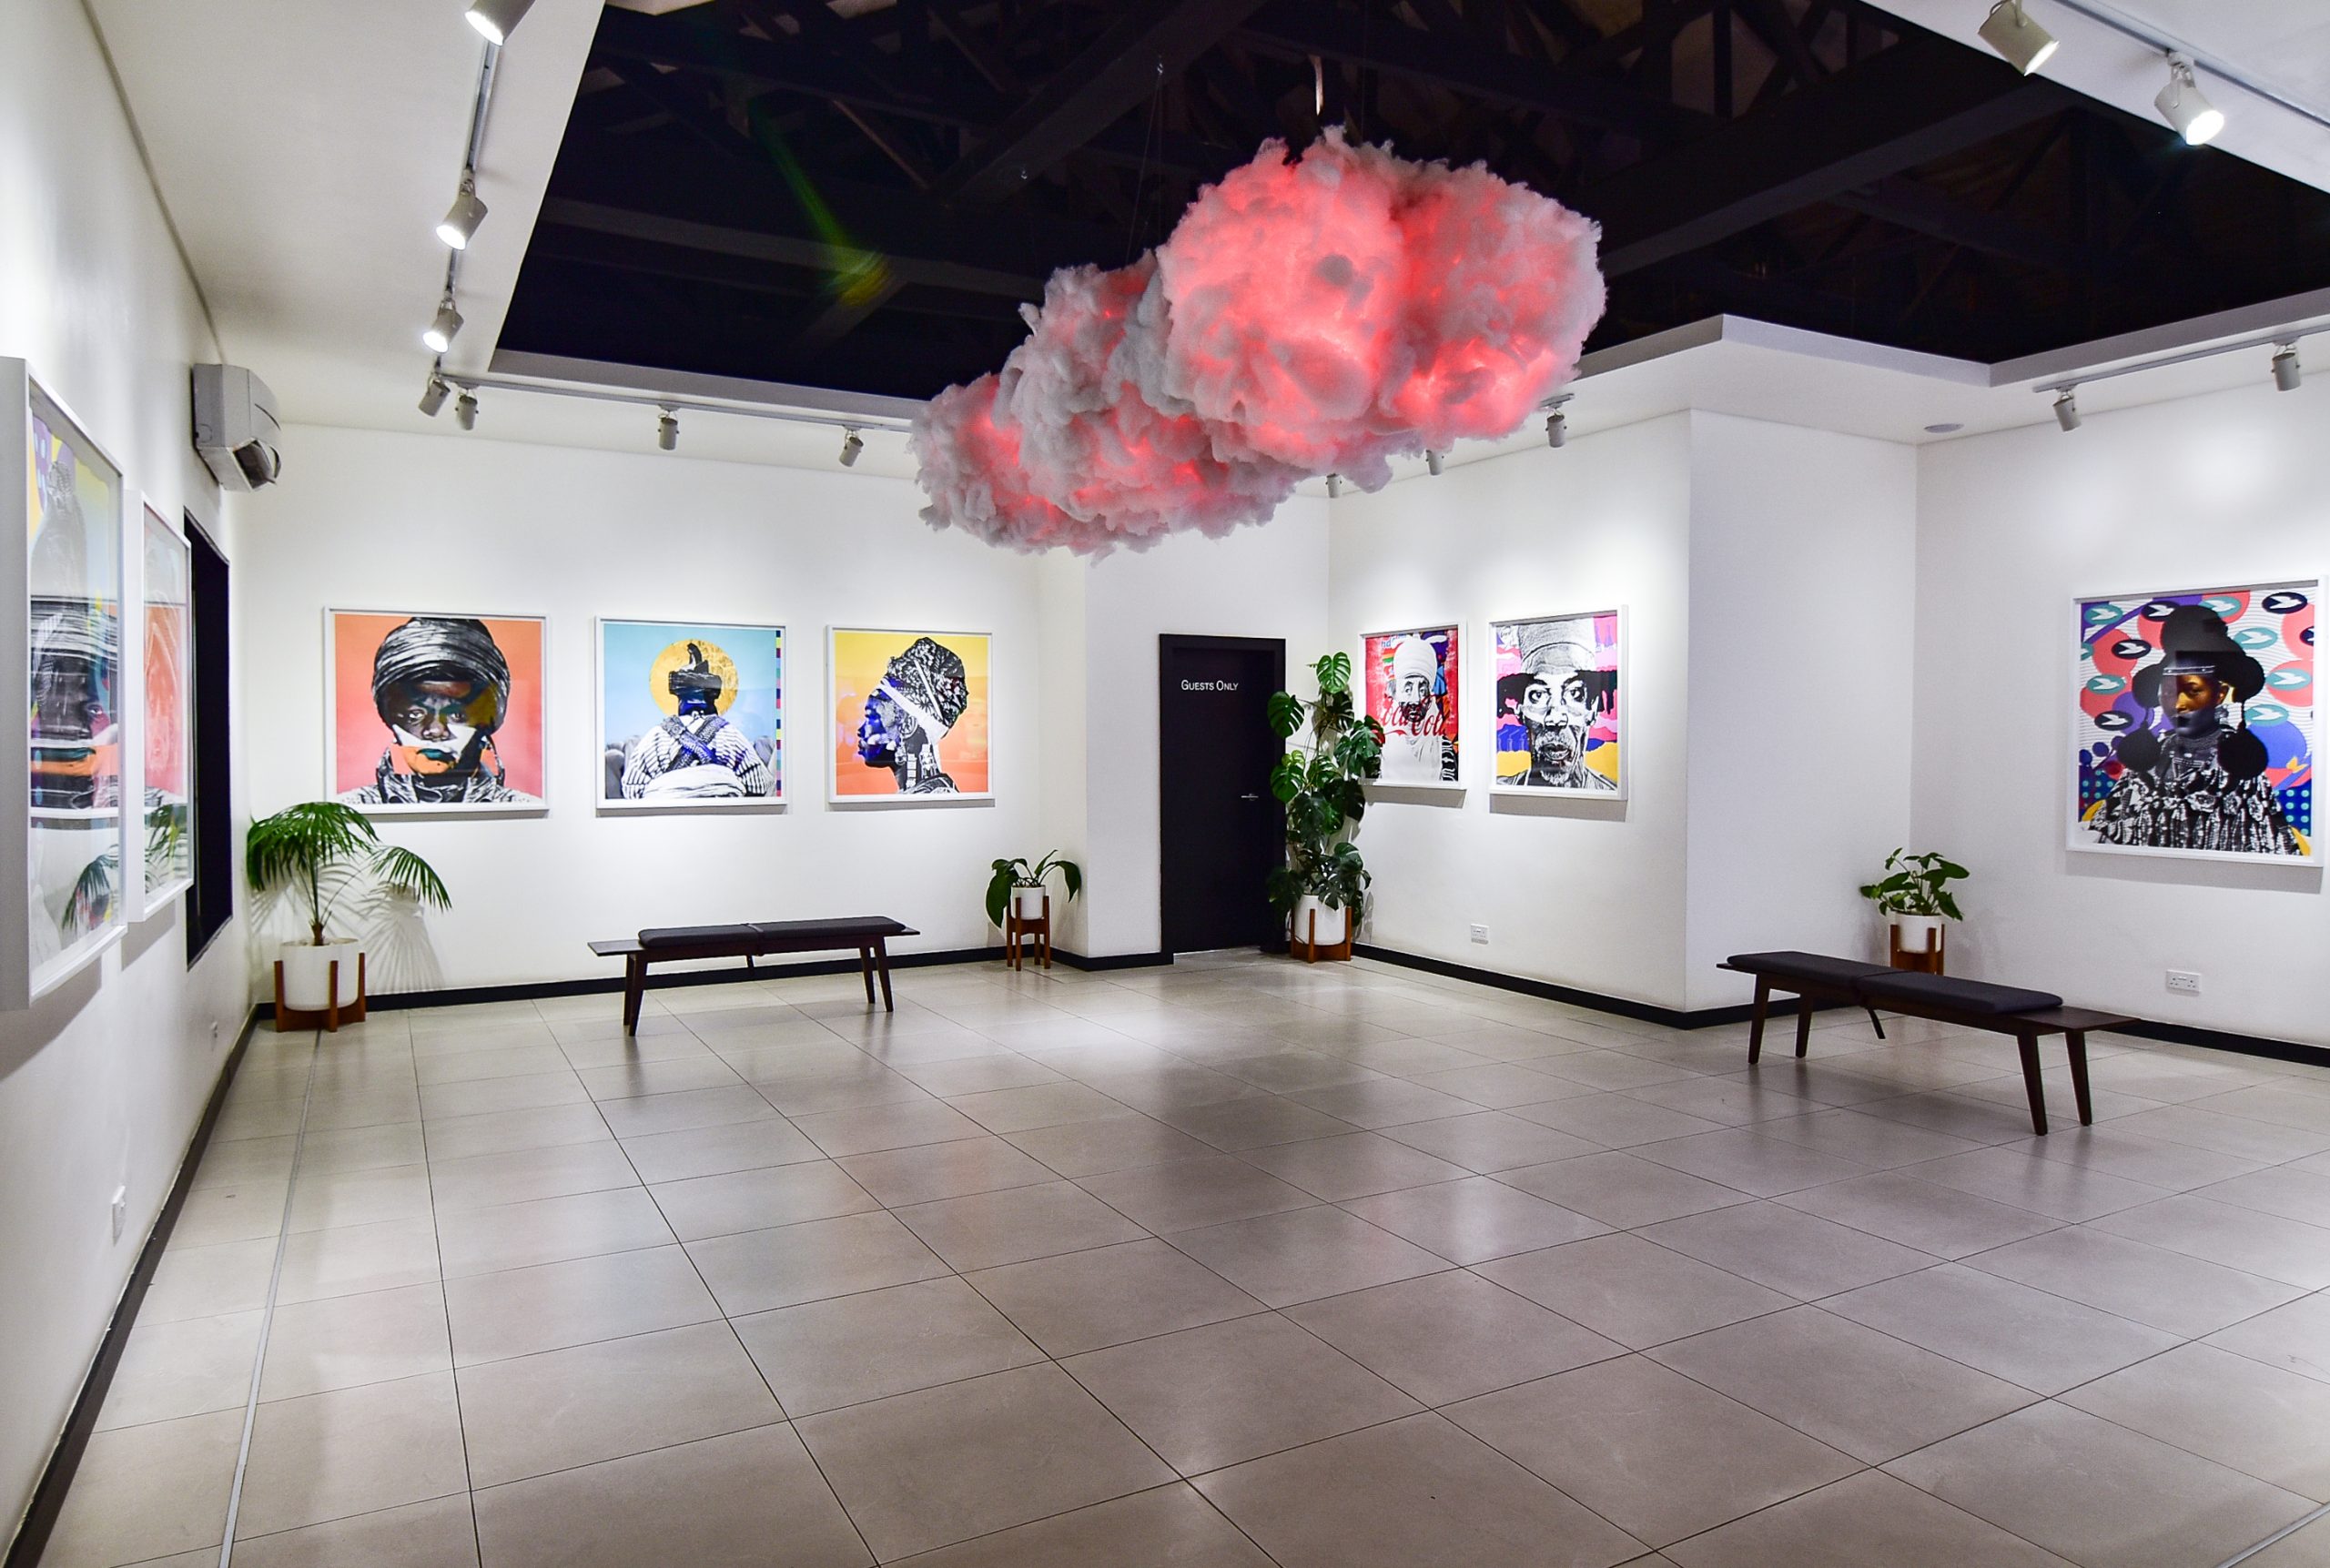 Installation view of Hyperflux exhibition by Williams Chechet. Courtesy of Retro Africa